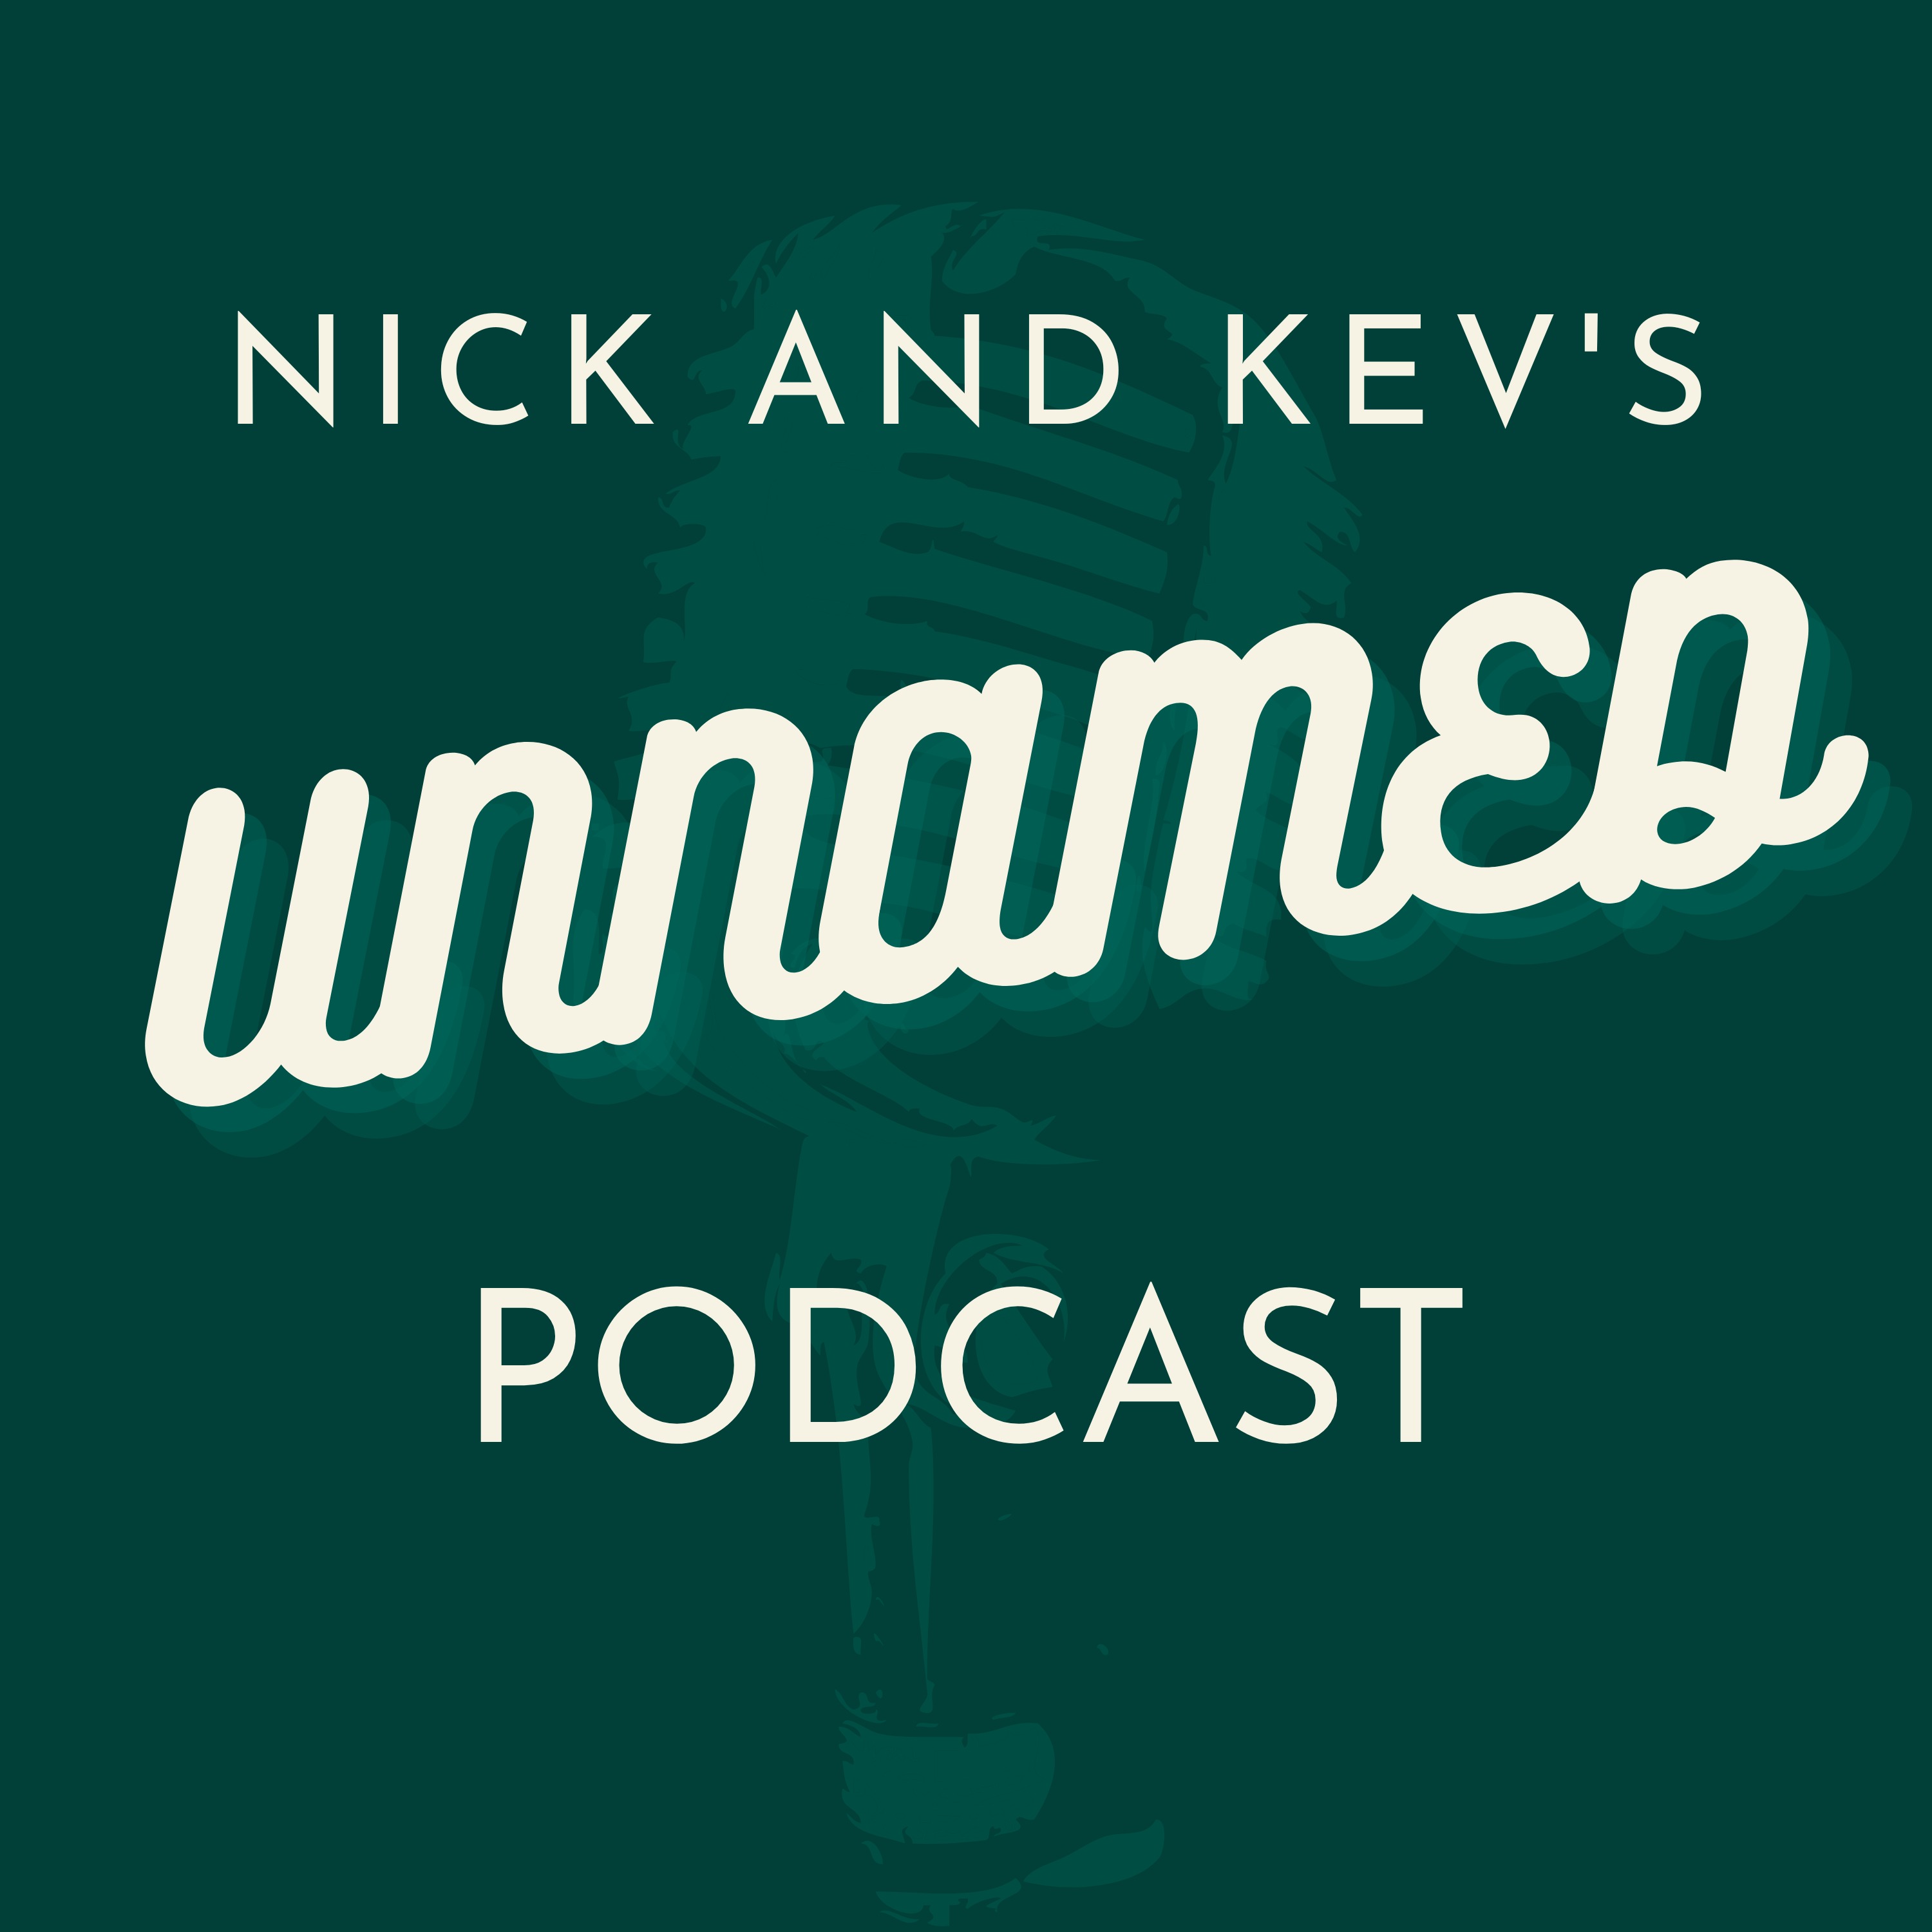 Nick and Kev's Unnamed Podcast